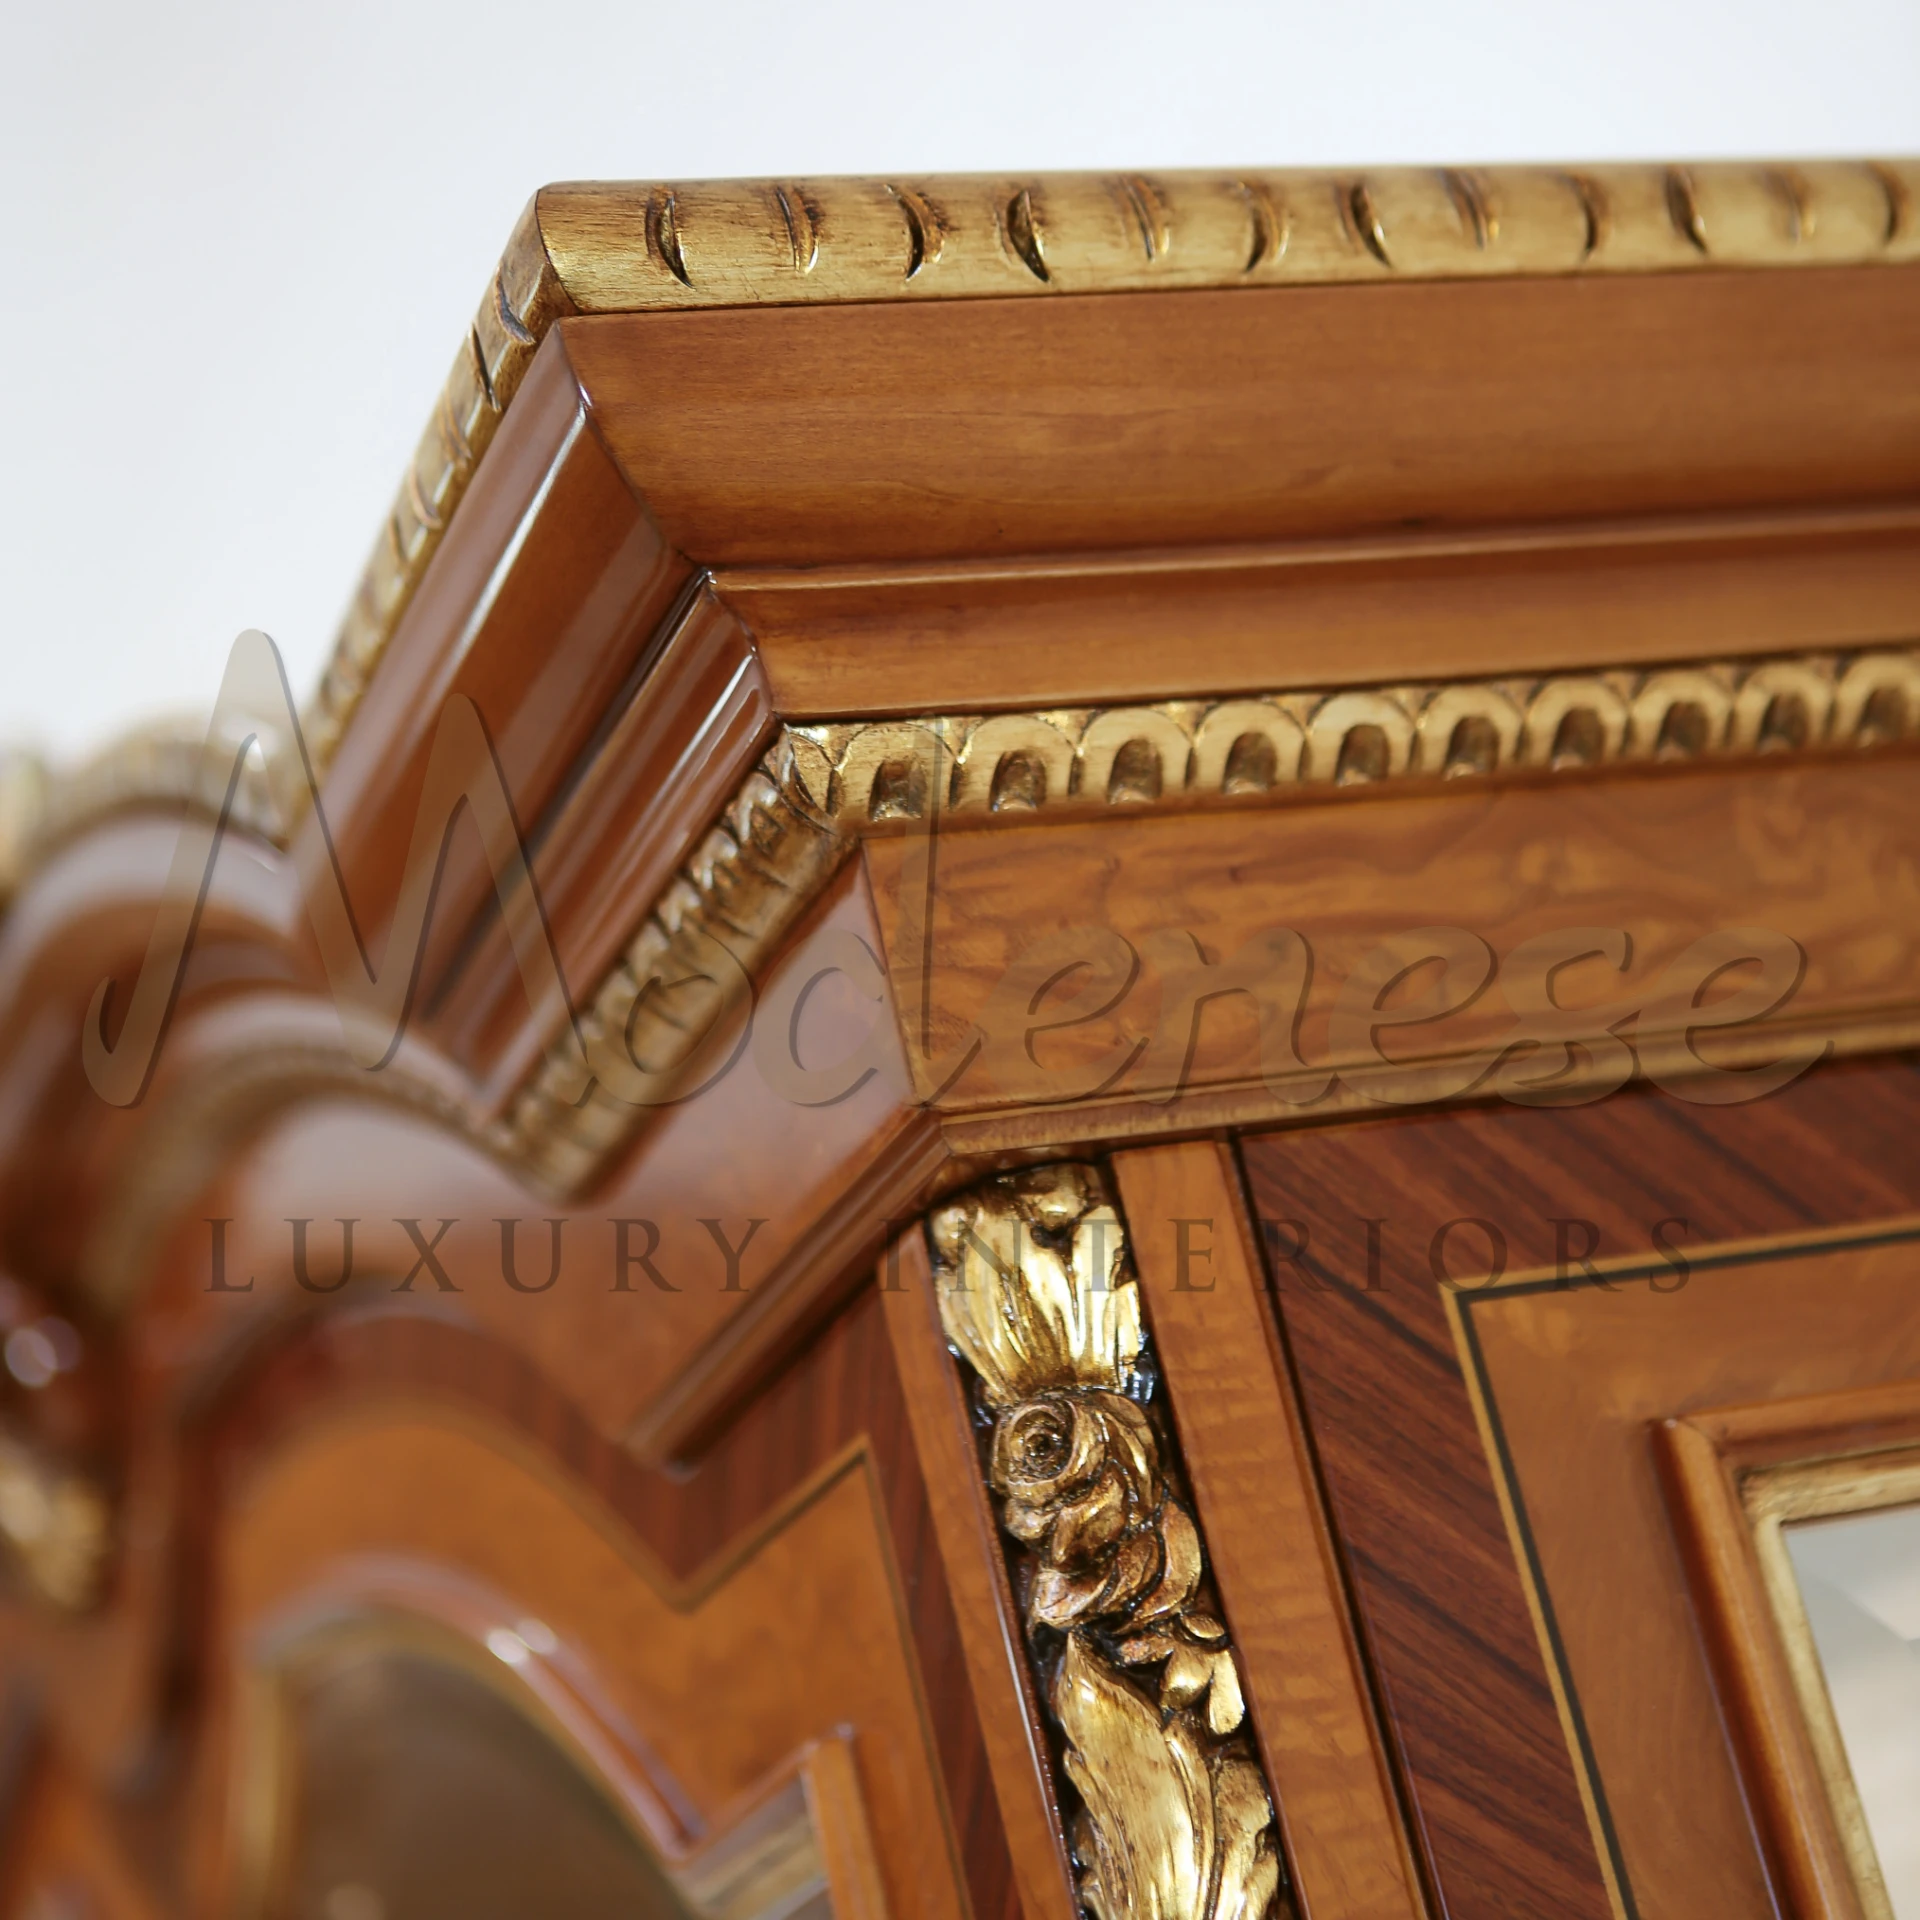 Close up view of the corners of the wooden cabinet with a complex golden design.